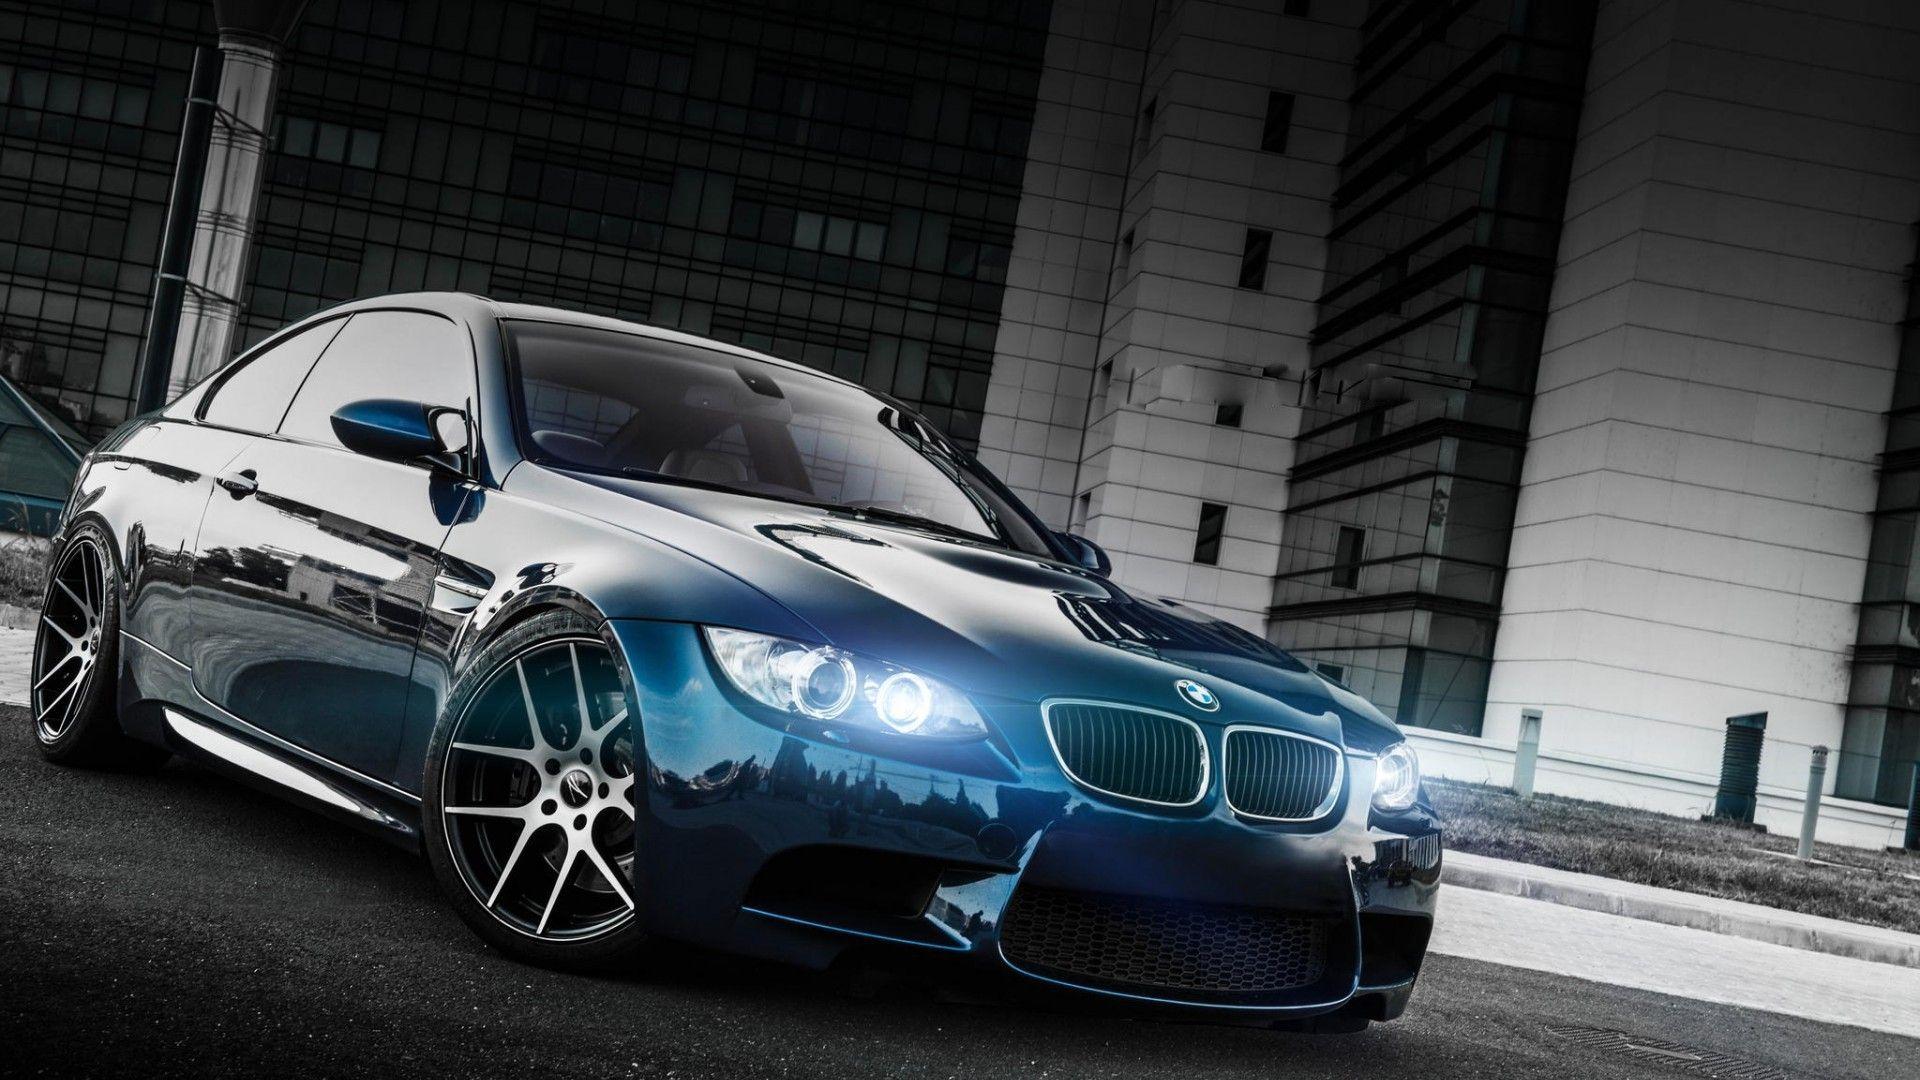 Neon lights BMW car wallpaper and image, picture